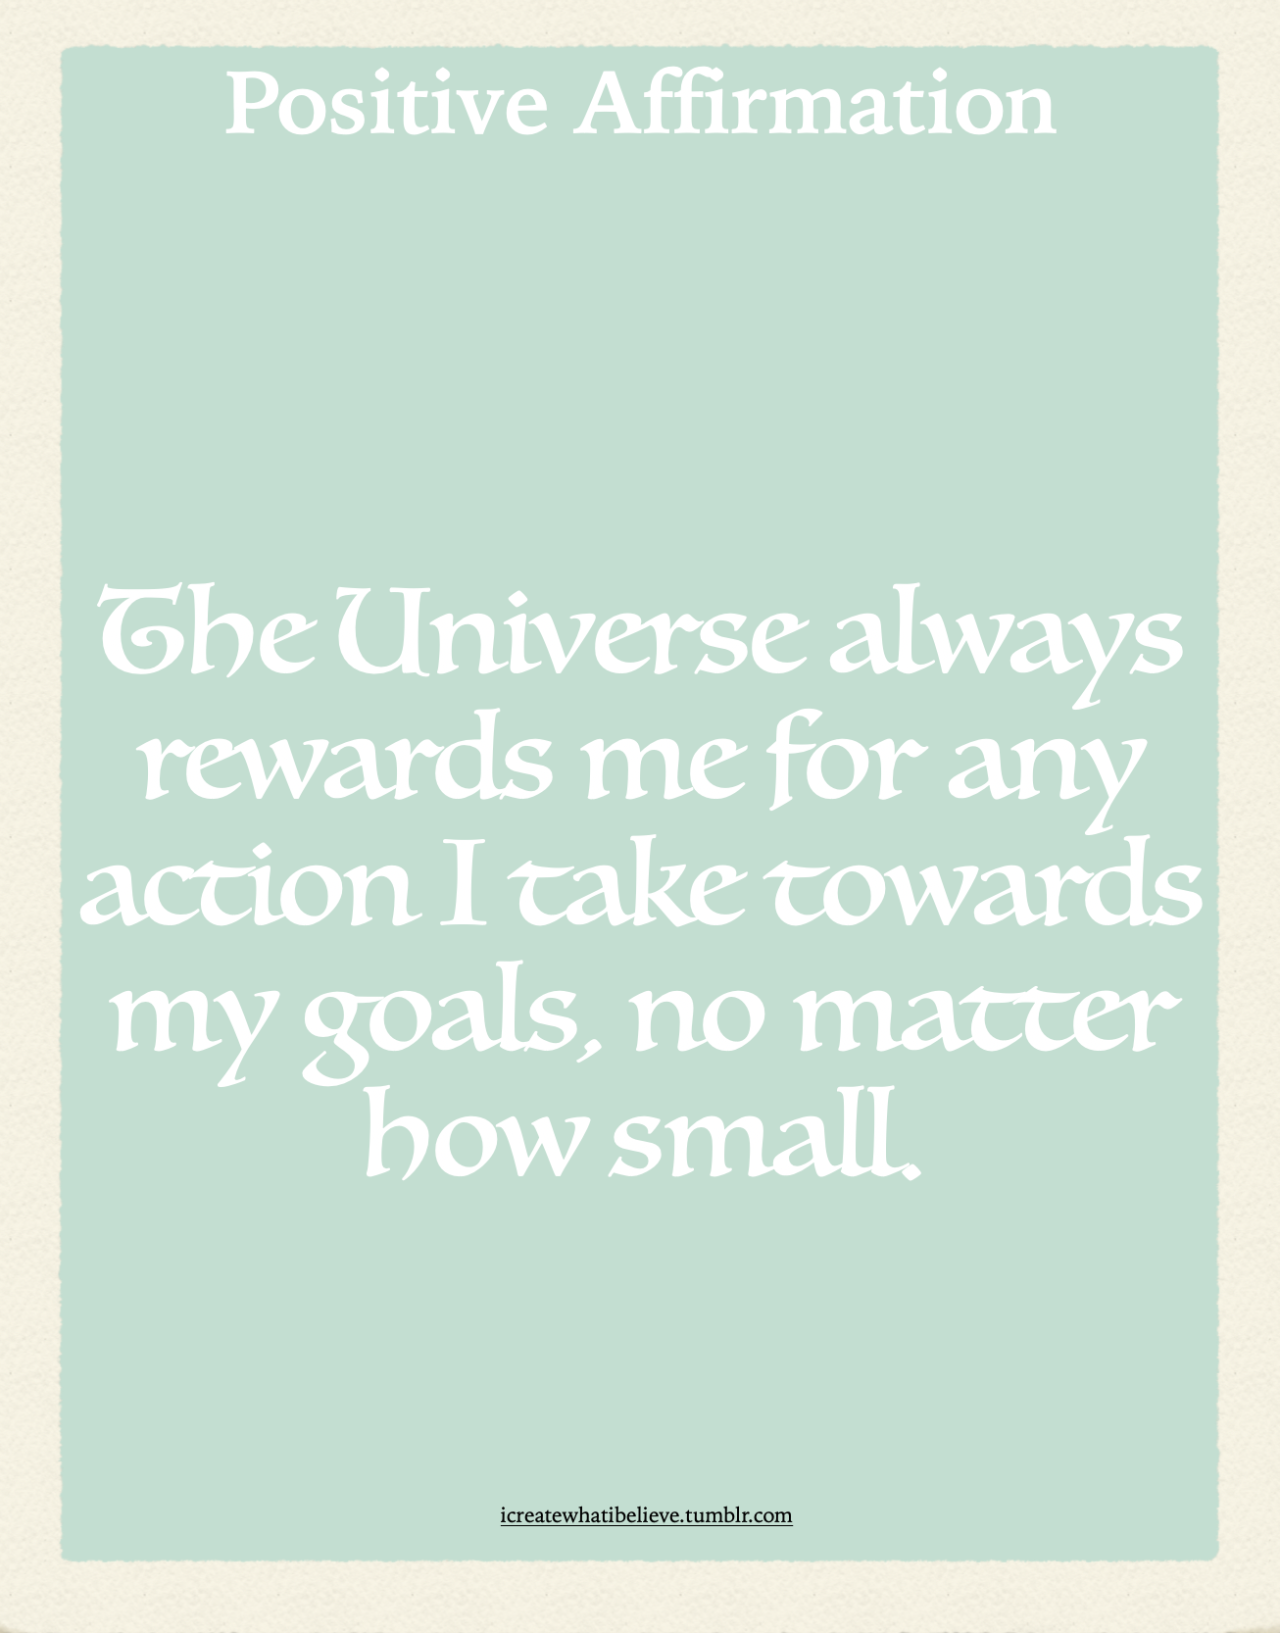 The Universe always rewards me for any action I take towards my goals, no matter how small. I take a tiny step of faith and the Universe takes care of all of the other details to make my dream a reality. #positive affirmations#affirmations#loa #law of attraction #manfiestation #power of belief